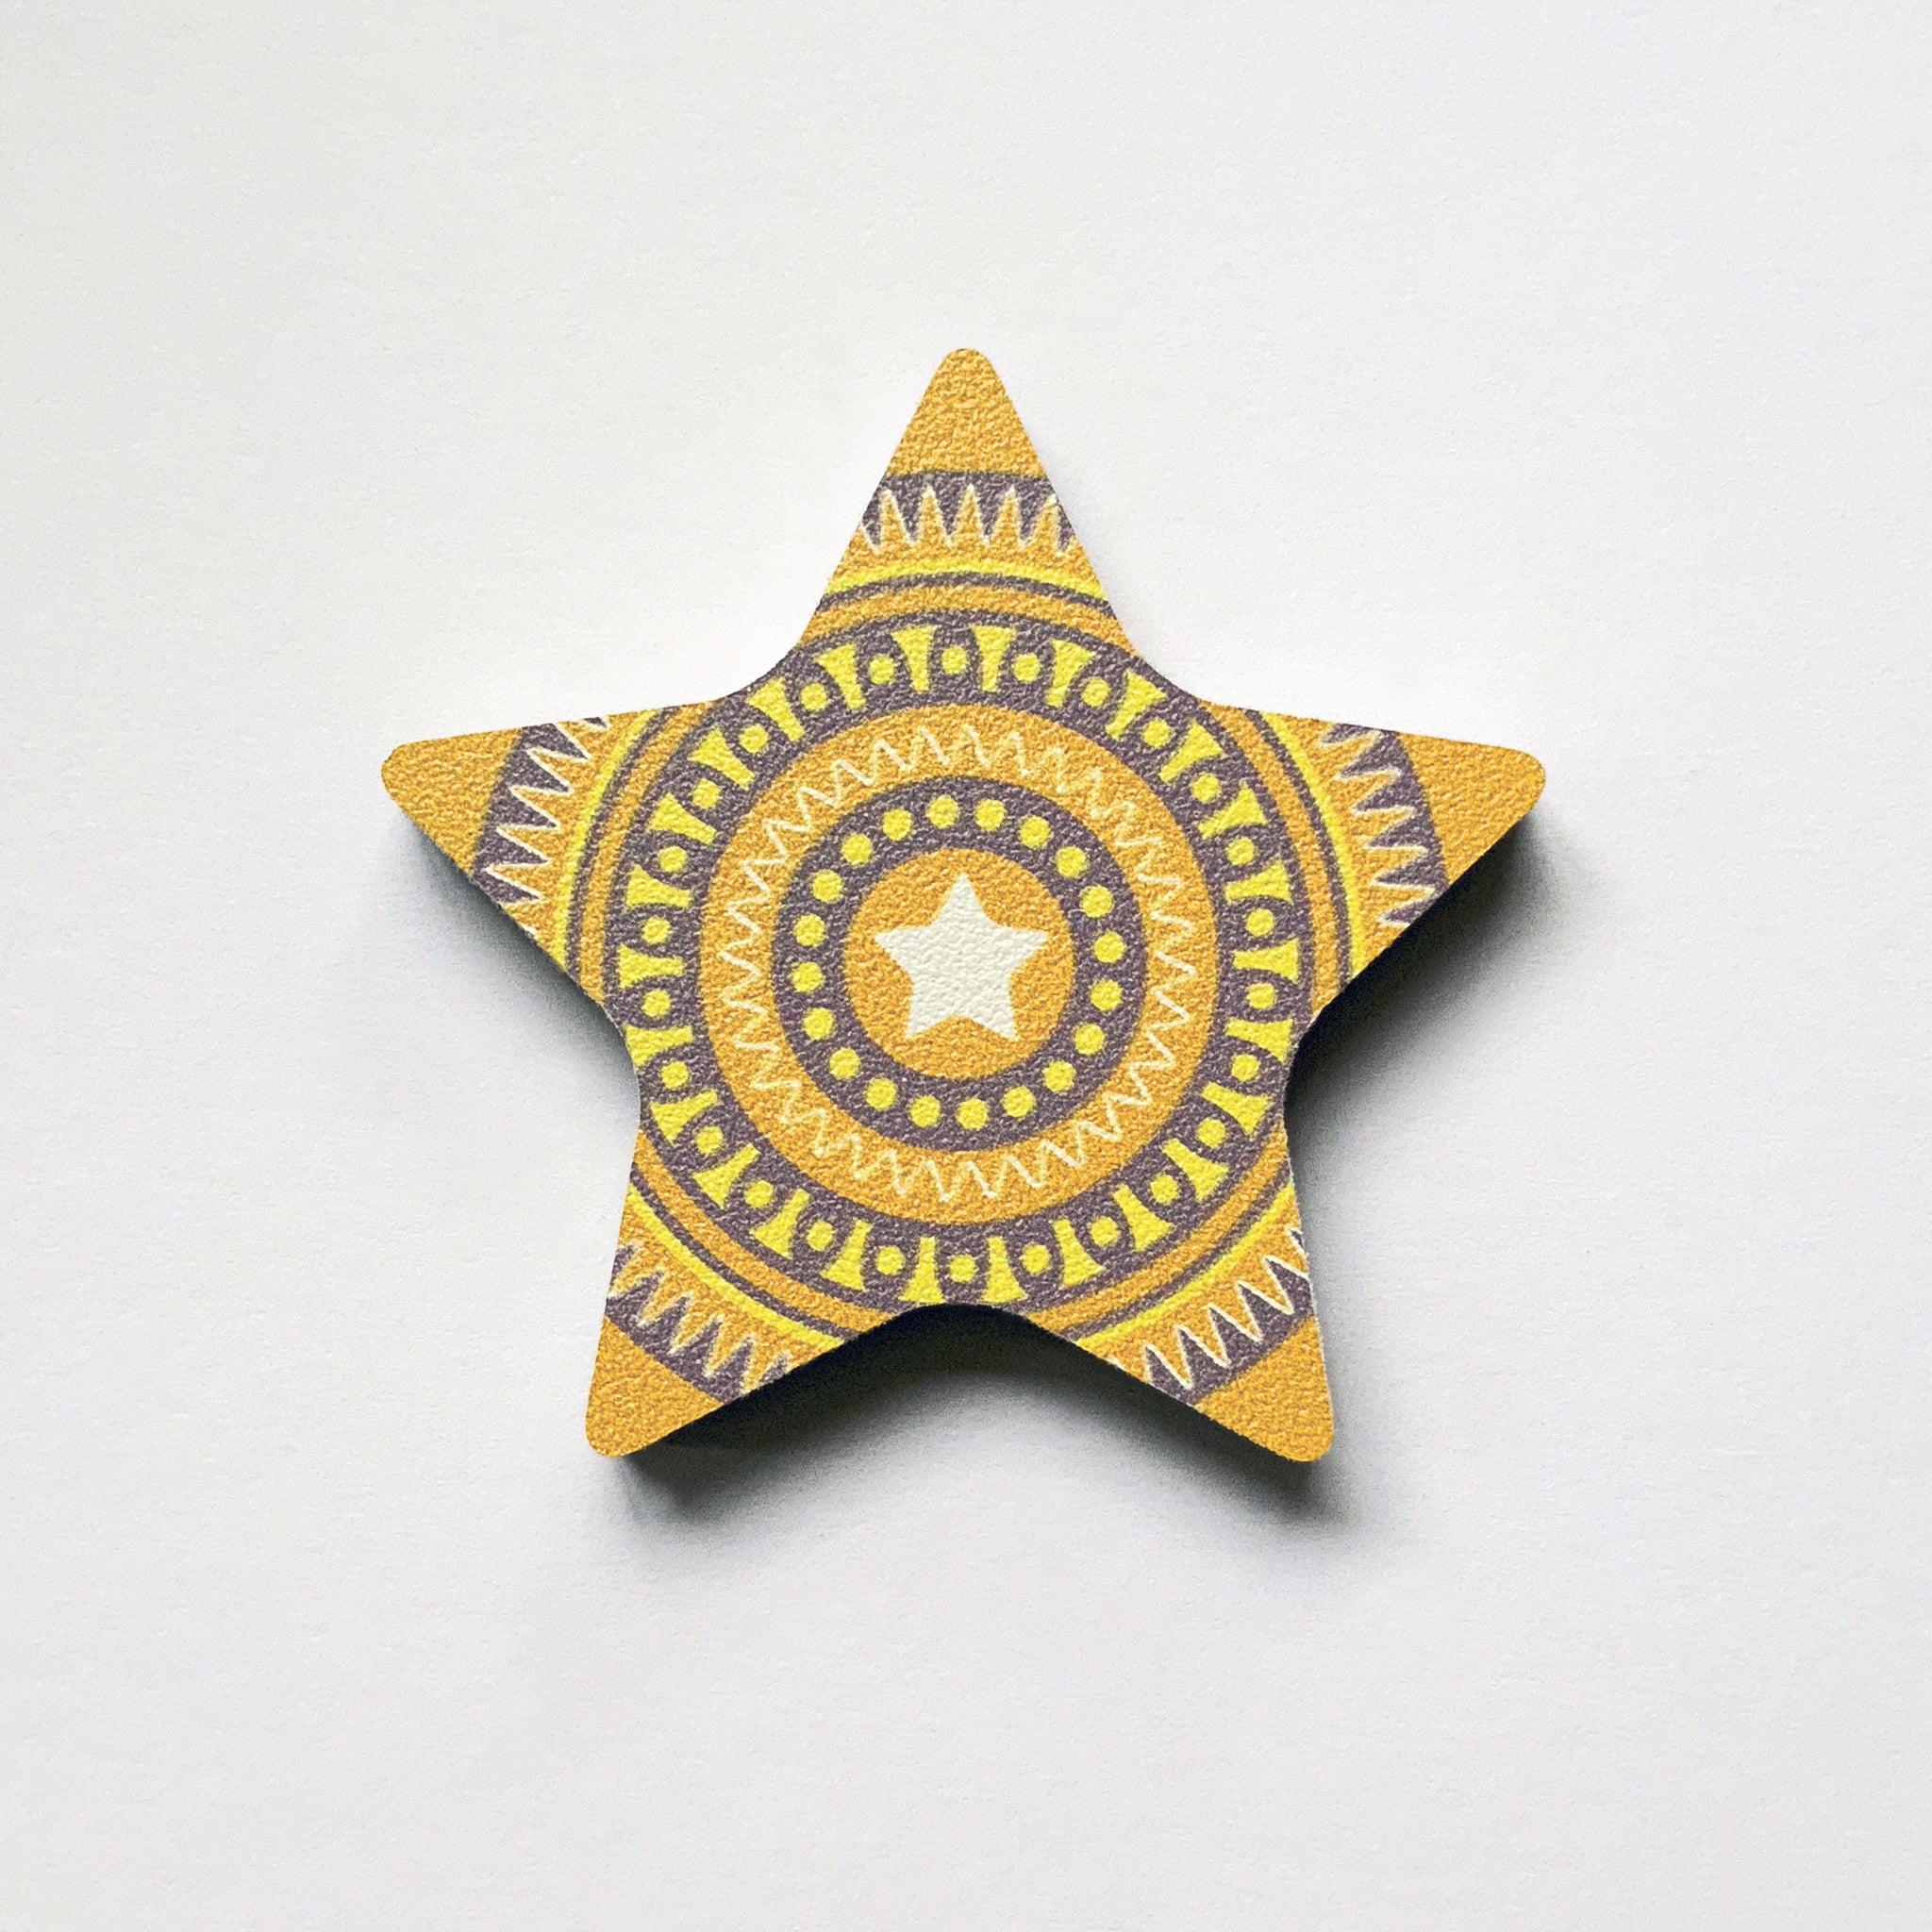 A yellow star shaped plywood fridge magnet by Beyond the Fridge